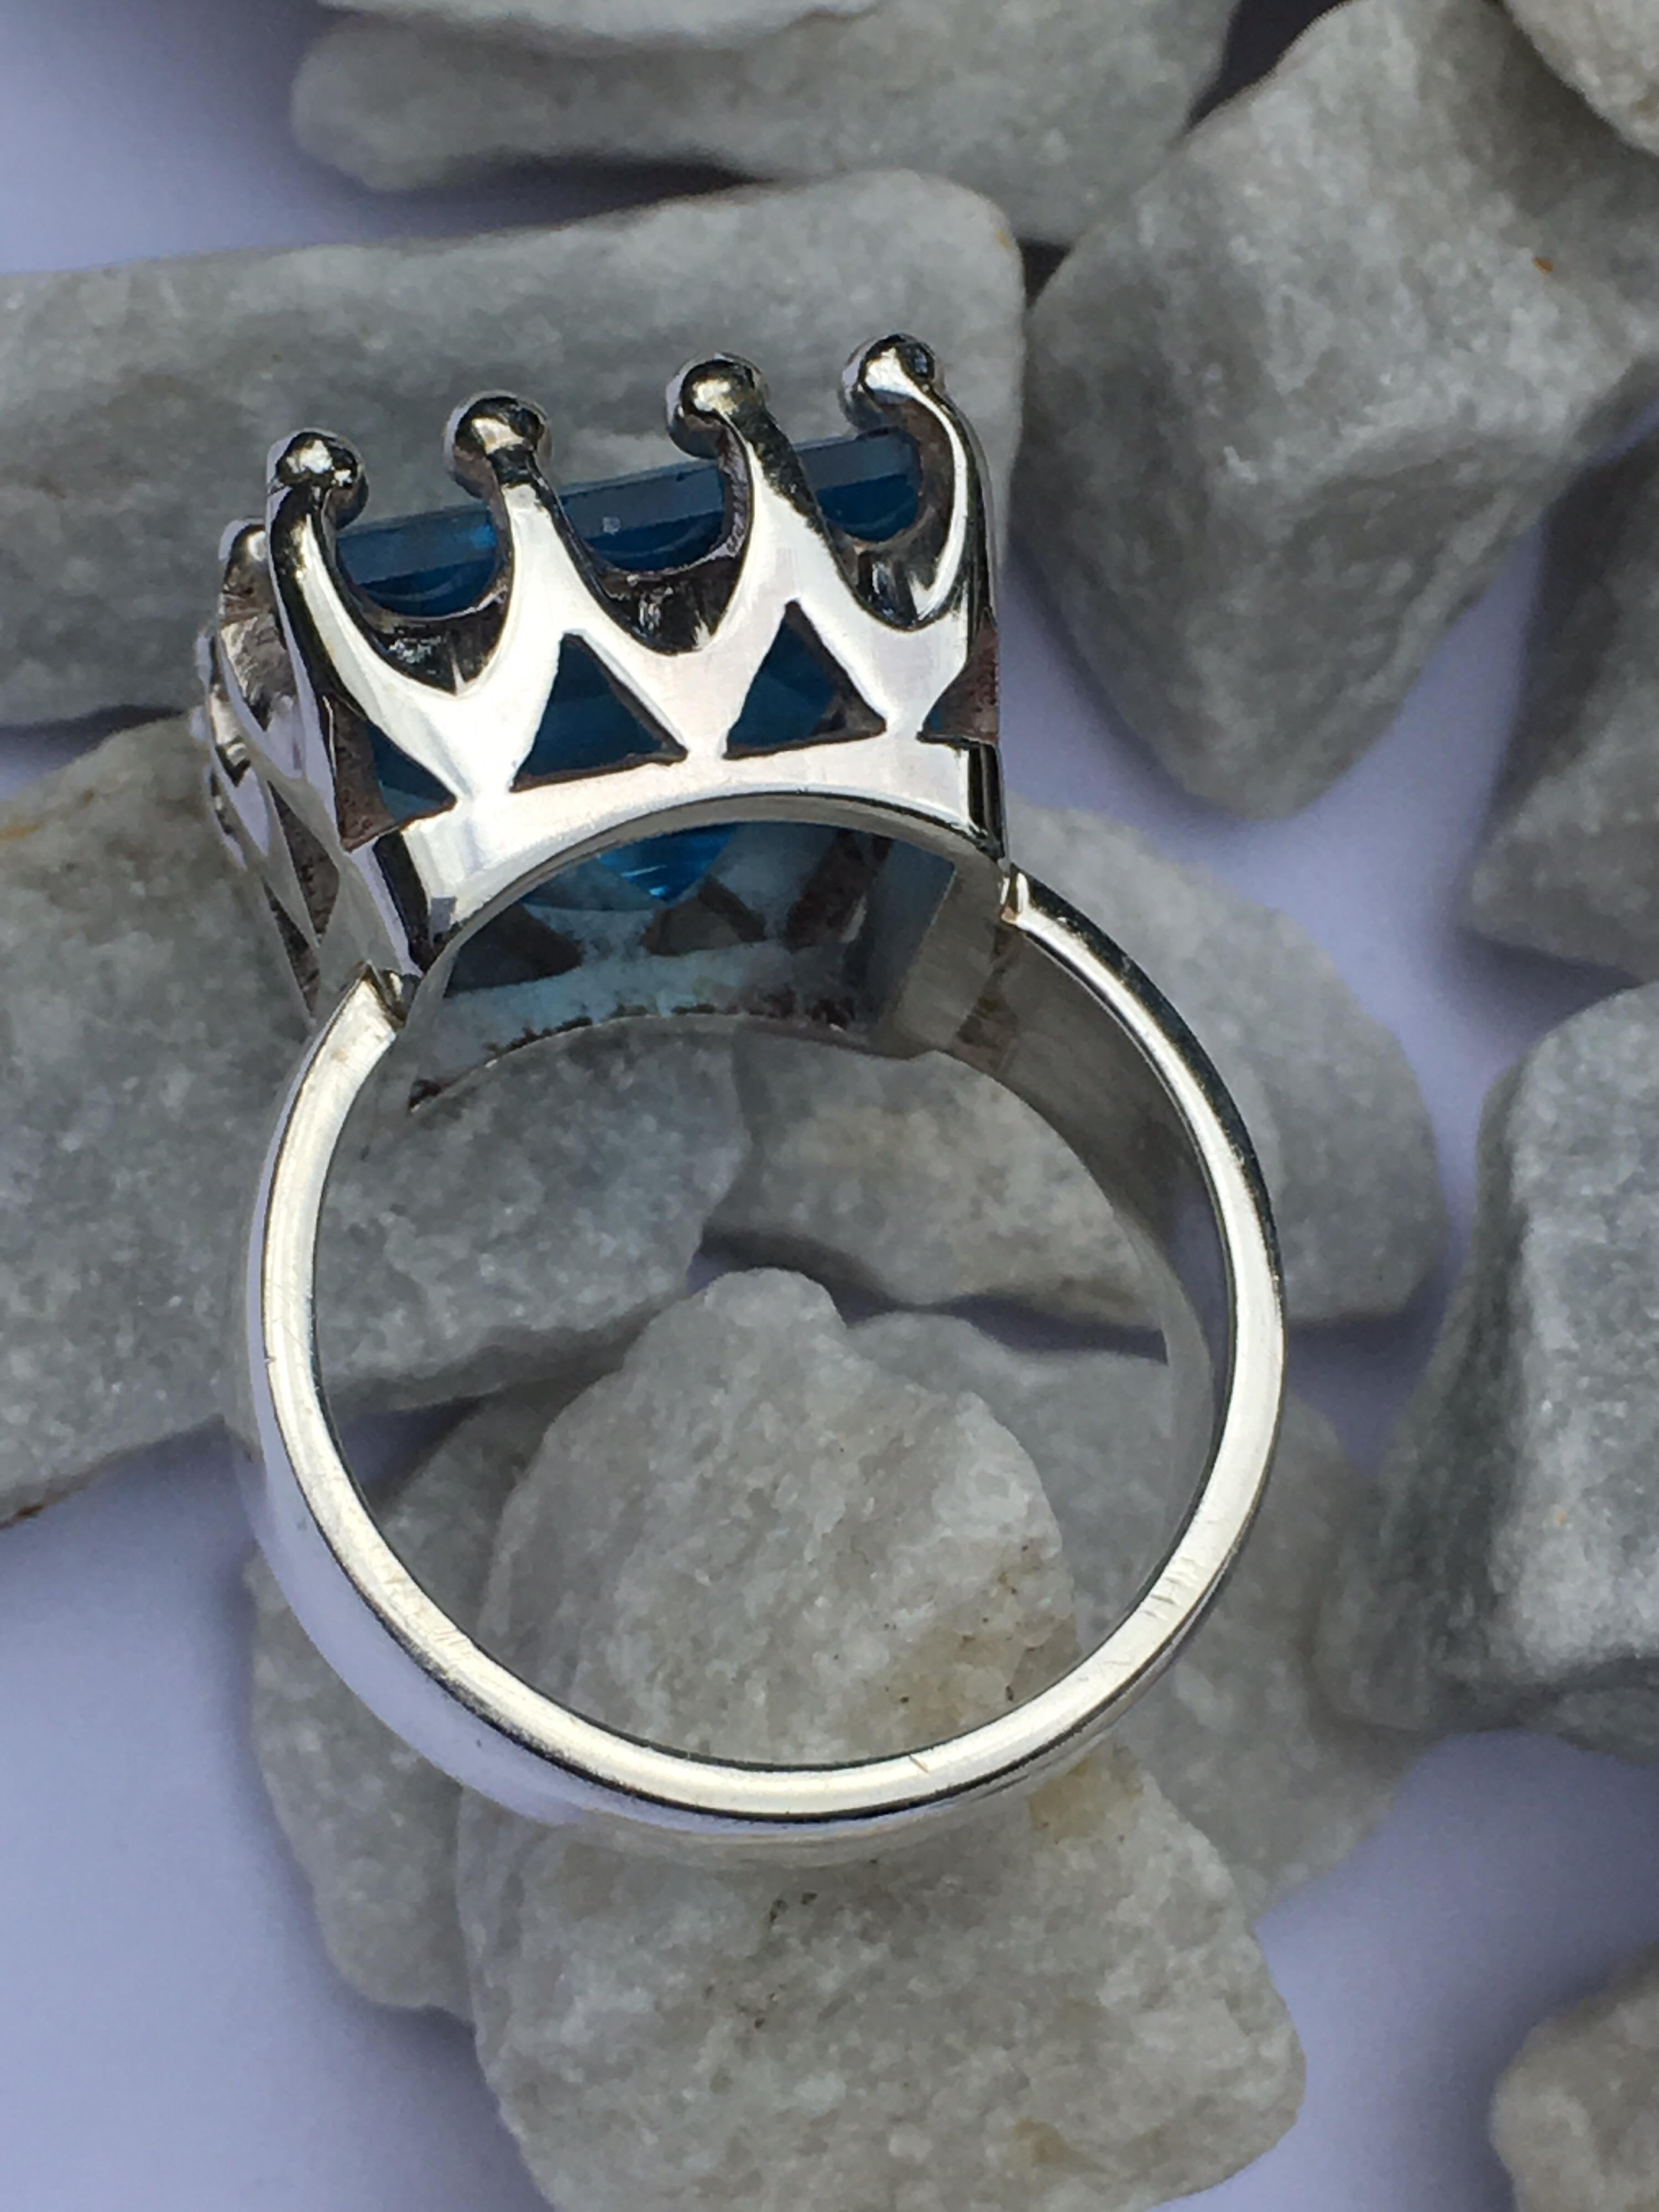 Square 13 MM Blue Topaz set in sterling silver is Hand Crafted Ring.
One of a Kind crown Design Ring is size 7.5 if needed you can resize.
If you need Matching pendant we have listed Pendant as well.
Total weight of the ring is 10.90 Gram